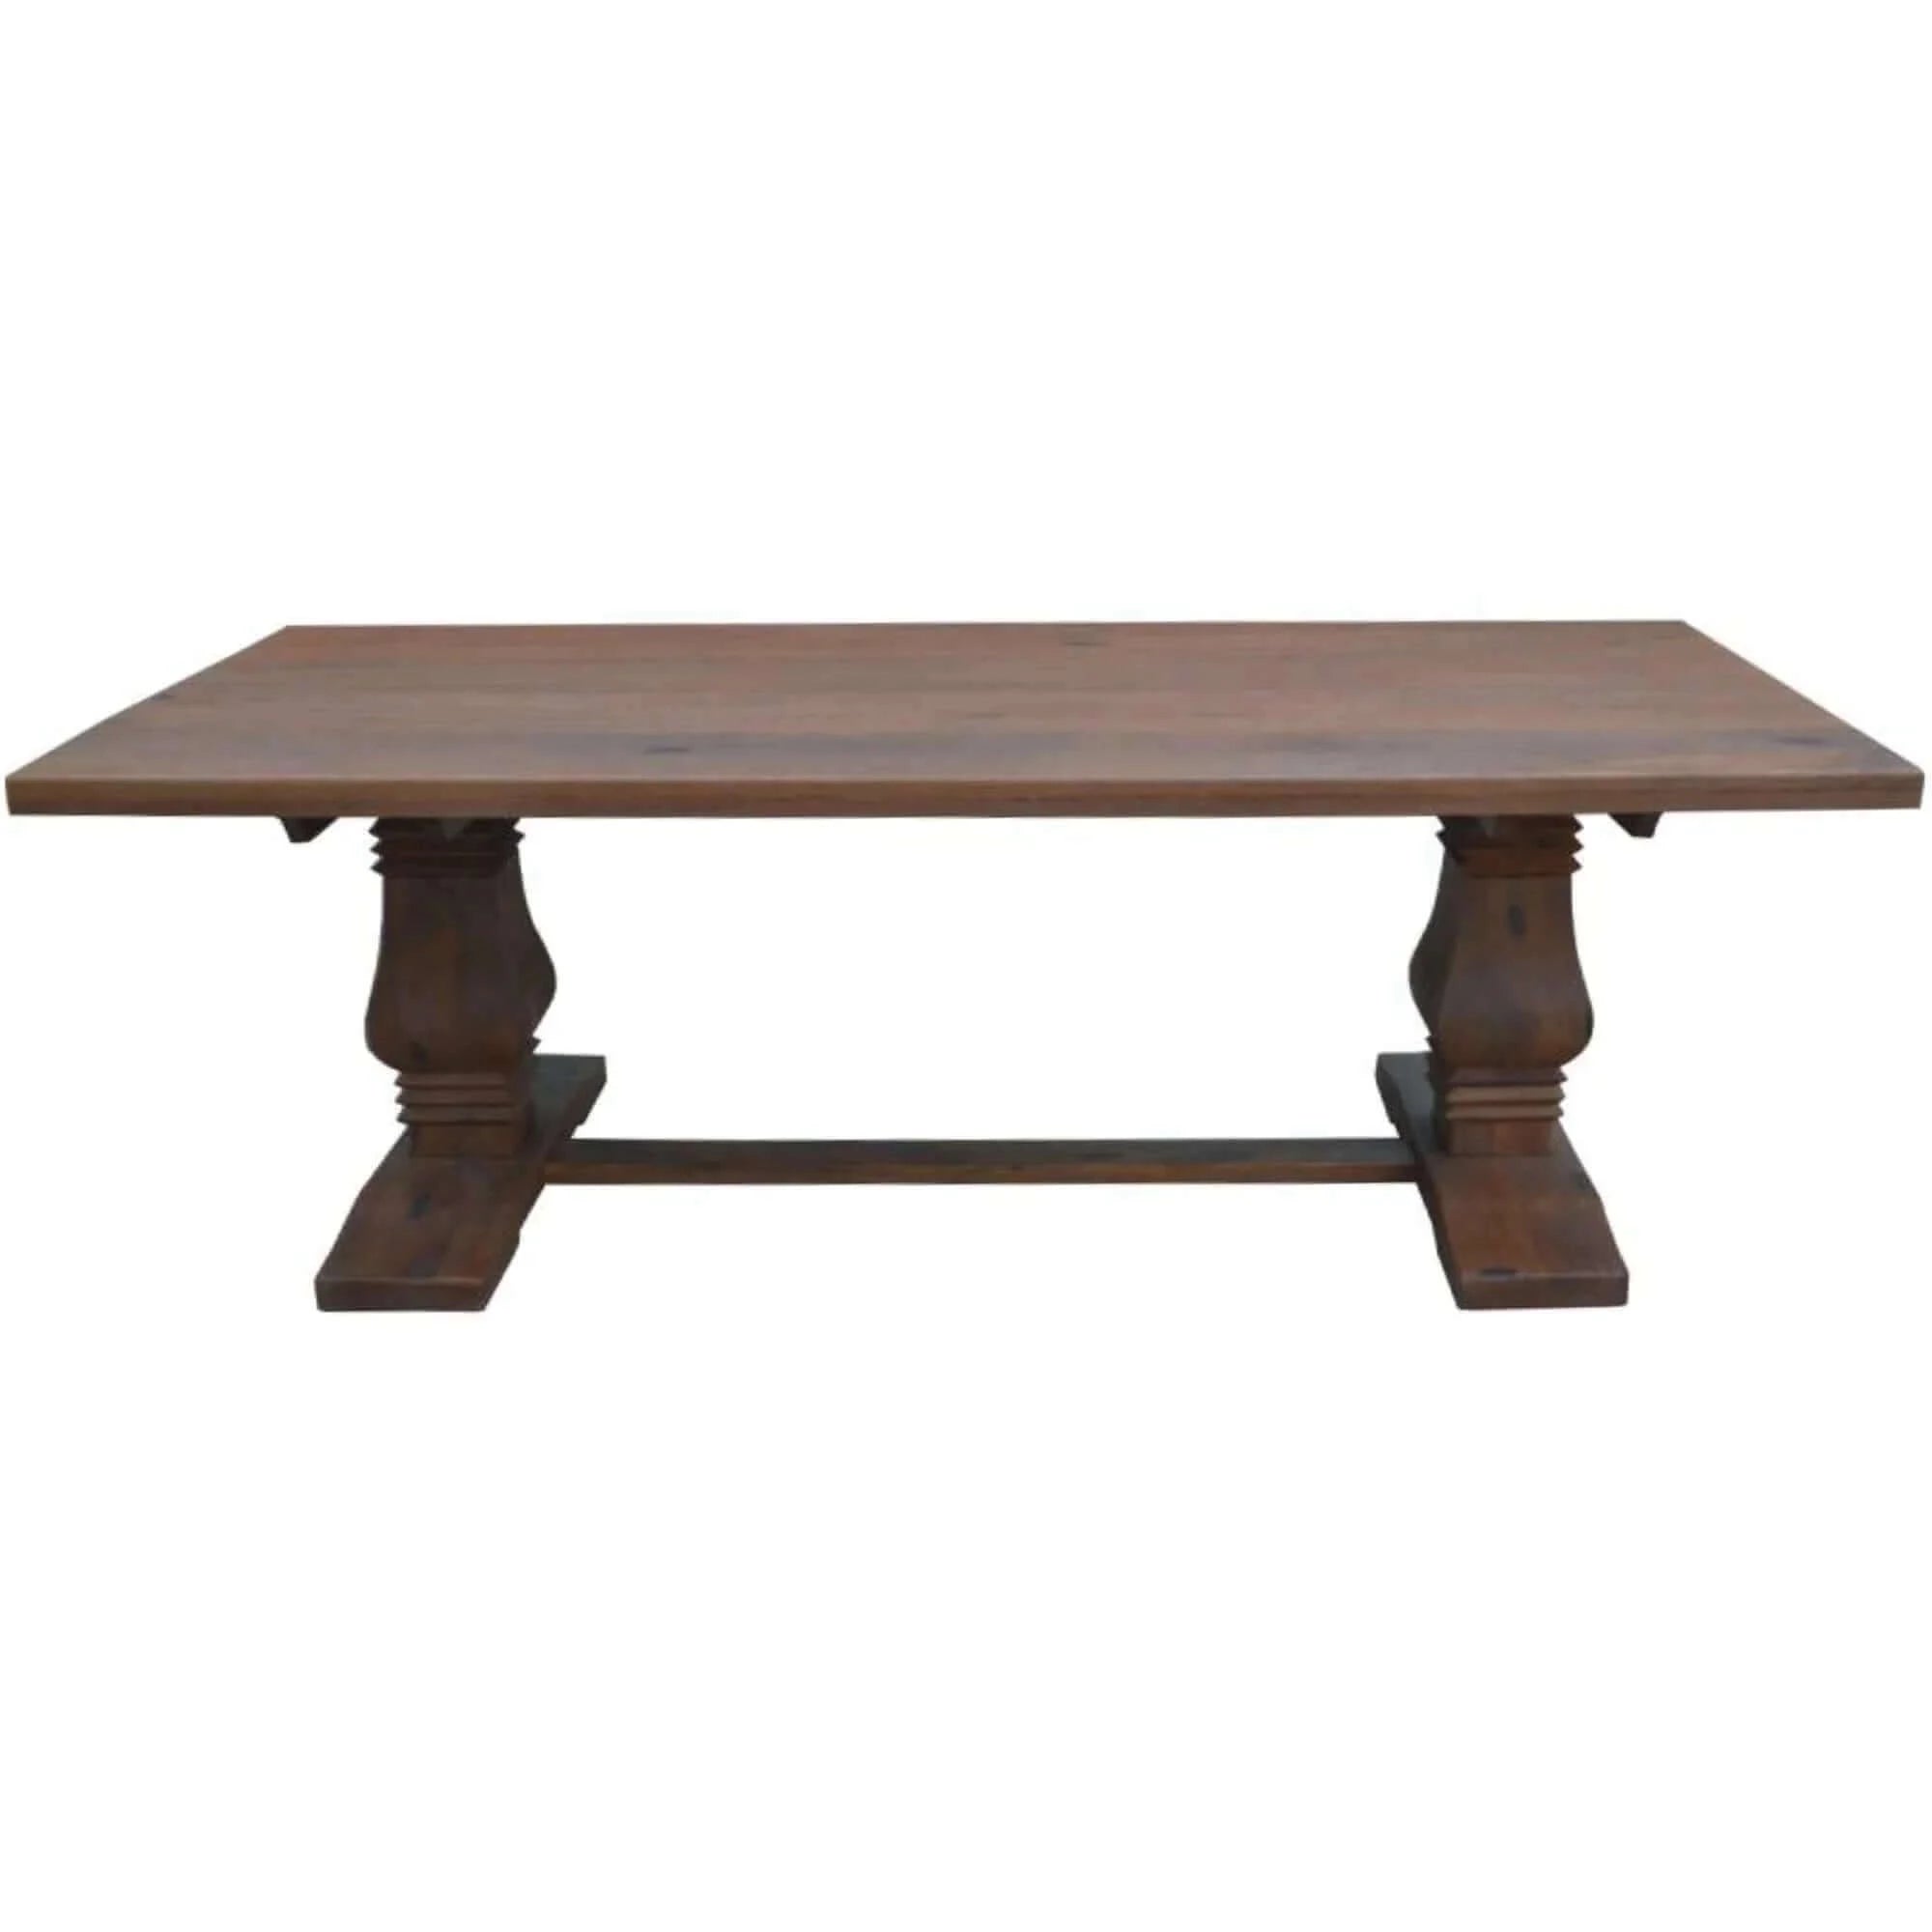 Buy florence dining table 180cm french provincial pedestal solid timber wood - upinteriors-Upinteriors